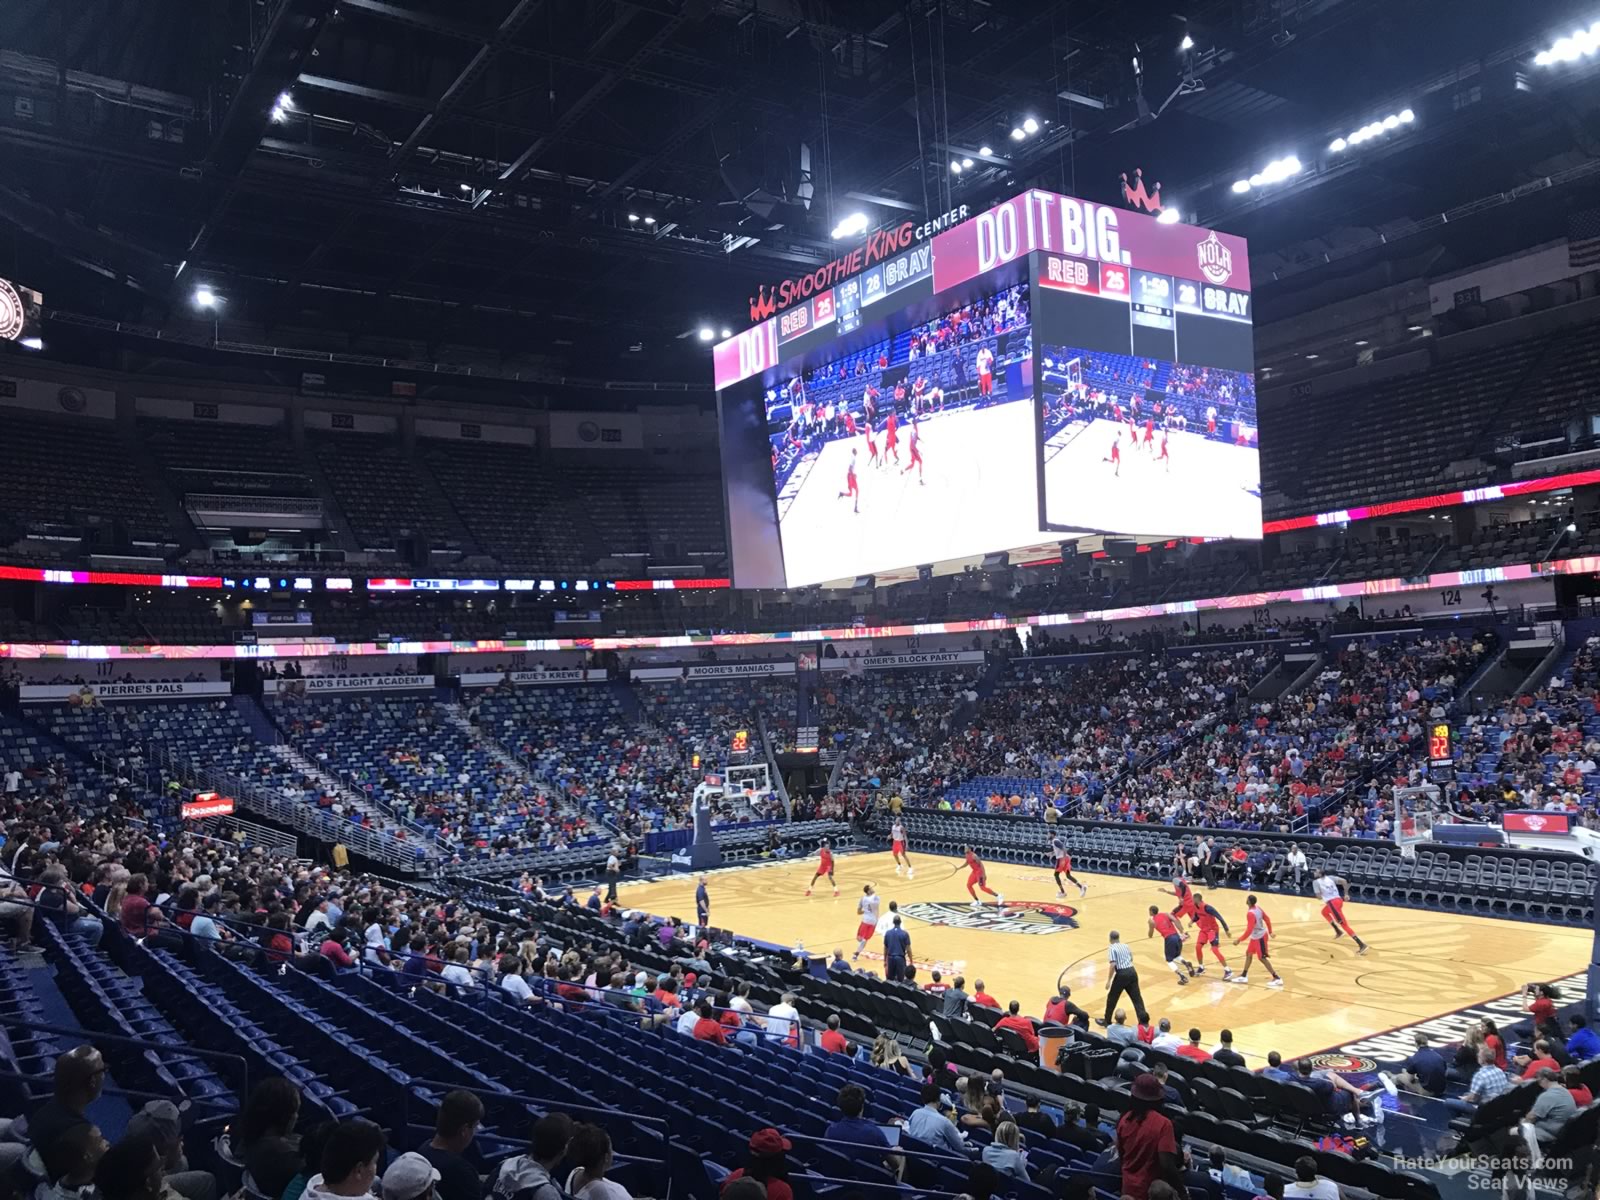 Smoothie King Center Section 110 - New Orleans Pelicans - RateYourSeats.com